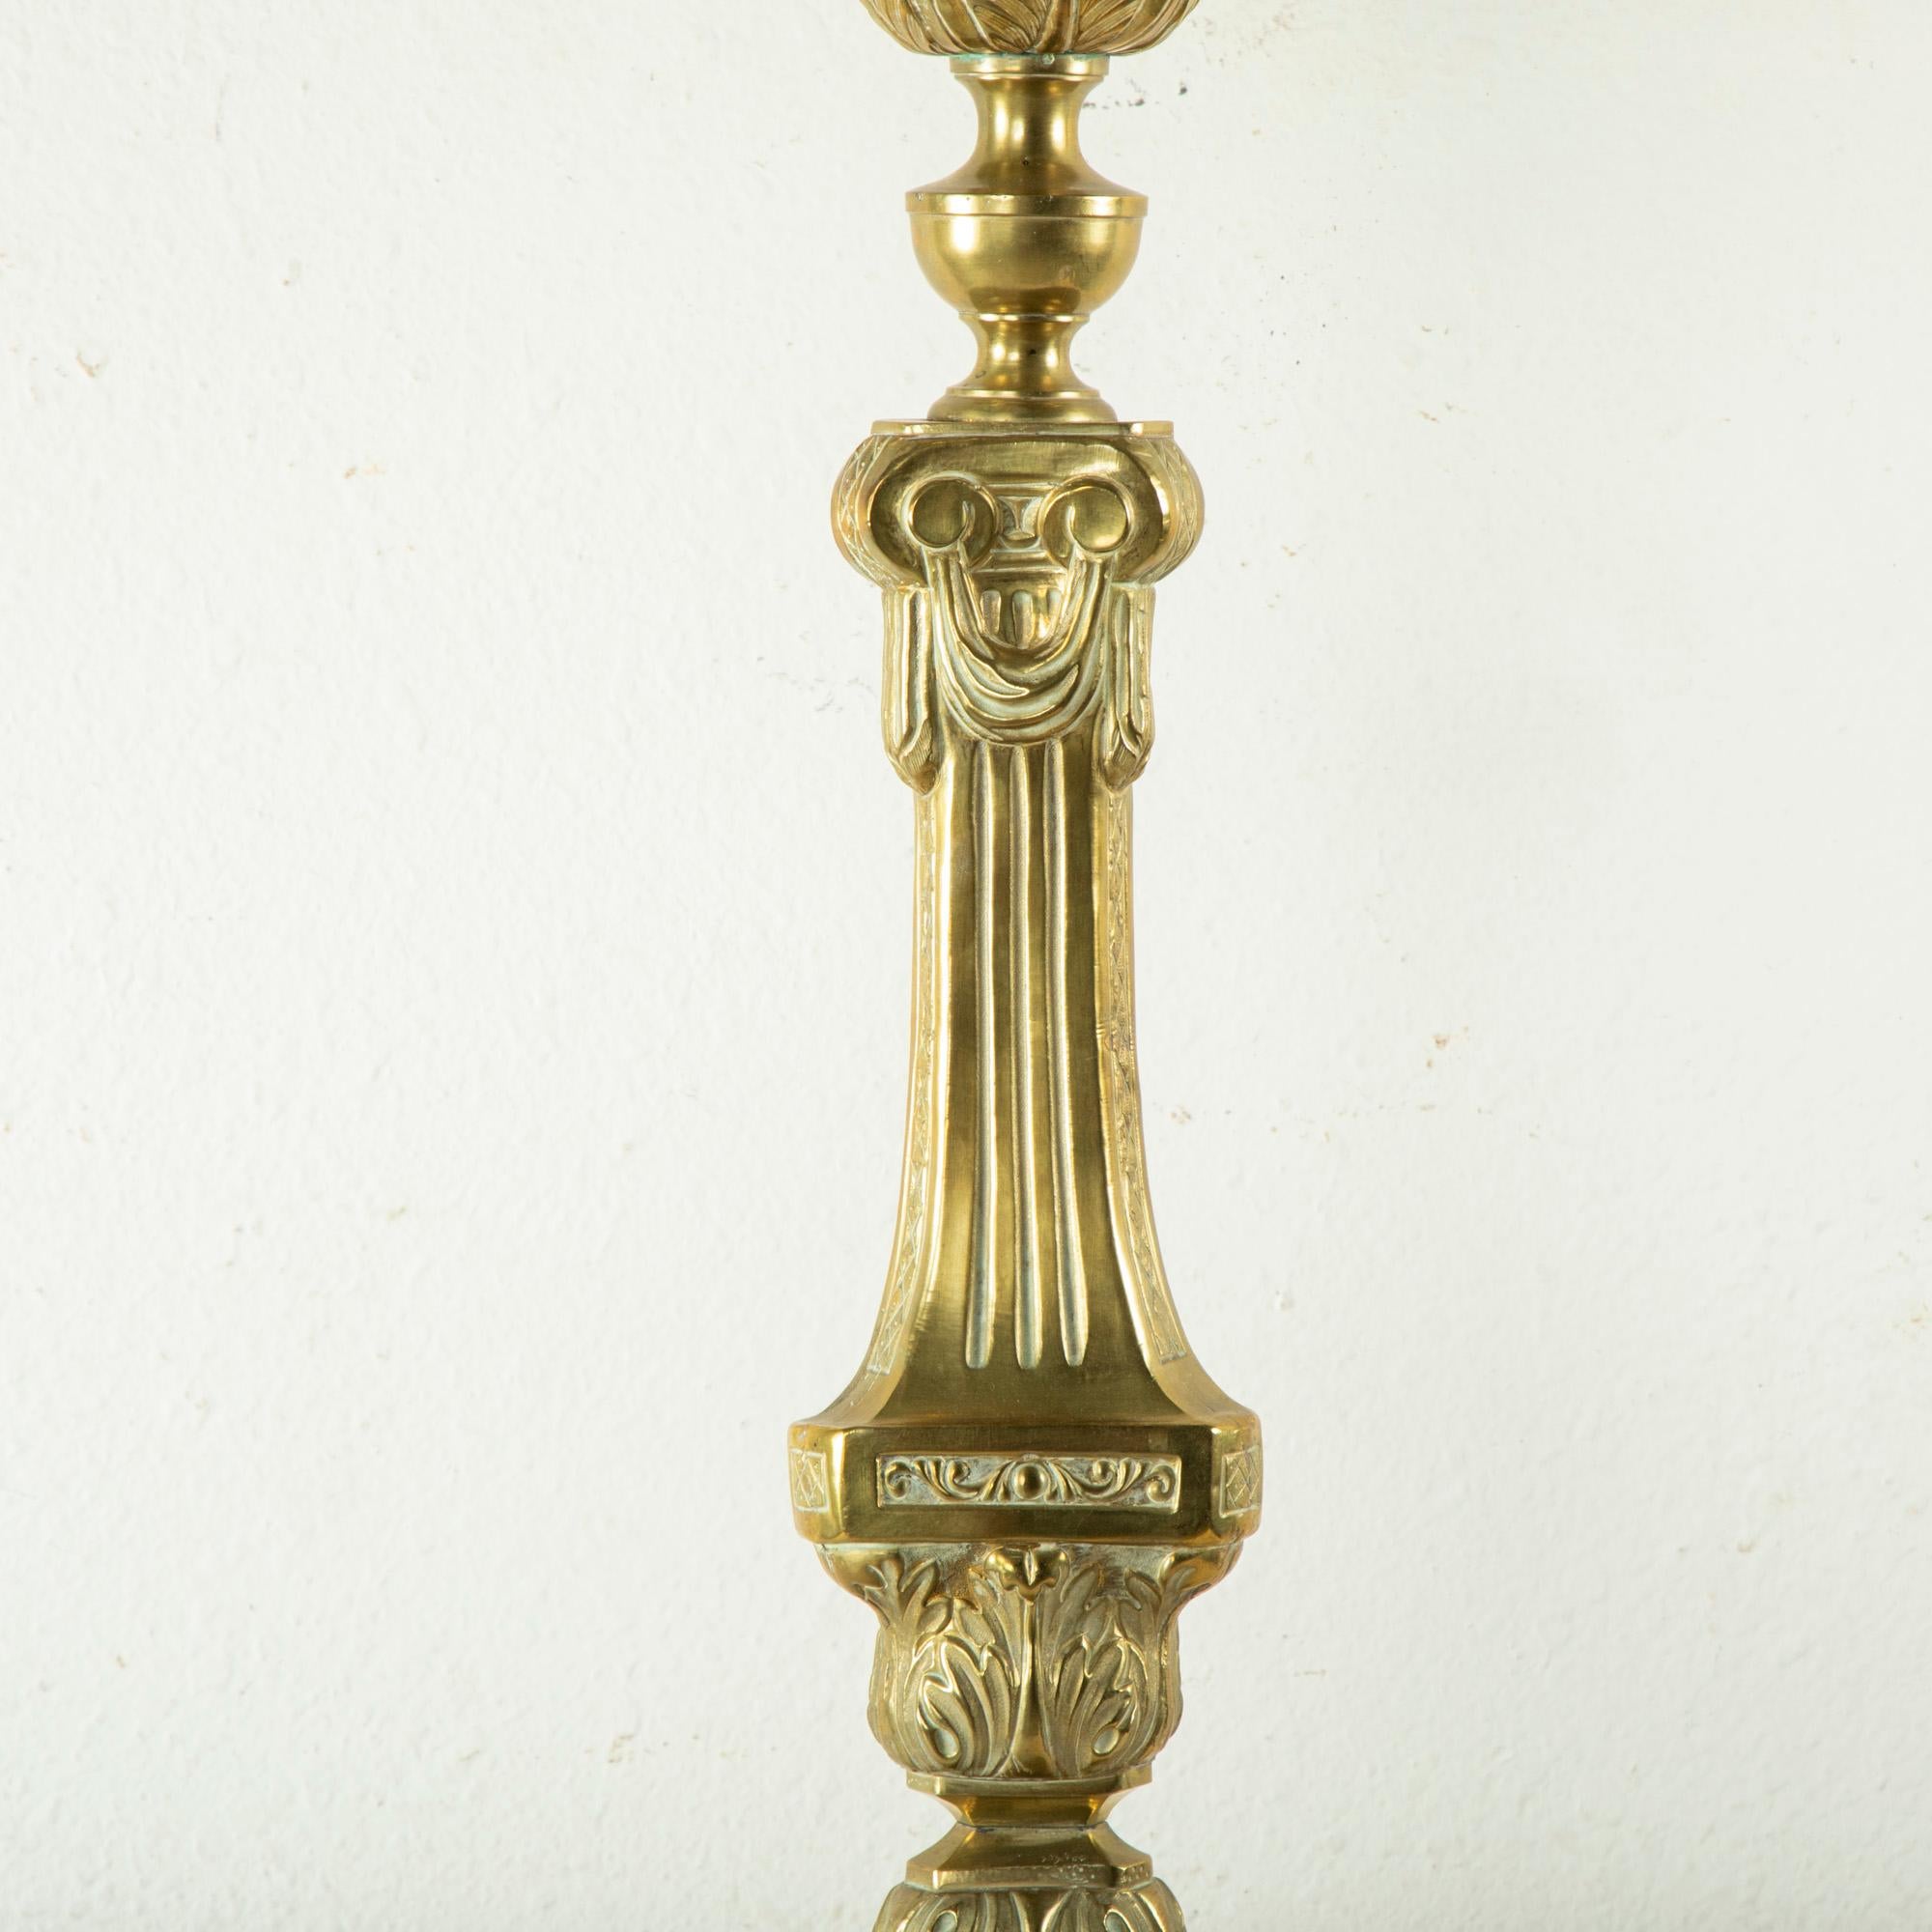 Tall Late 19th Century Brass Repousse Church Pricket, Candlestick In Good Condition For Sale In Fayetteville, AR